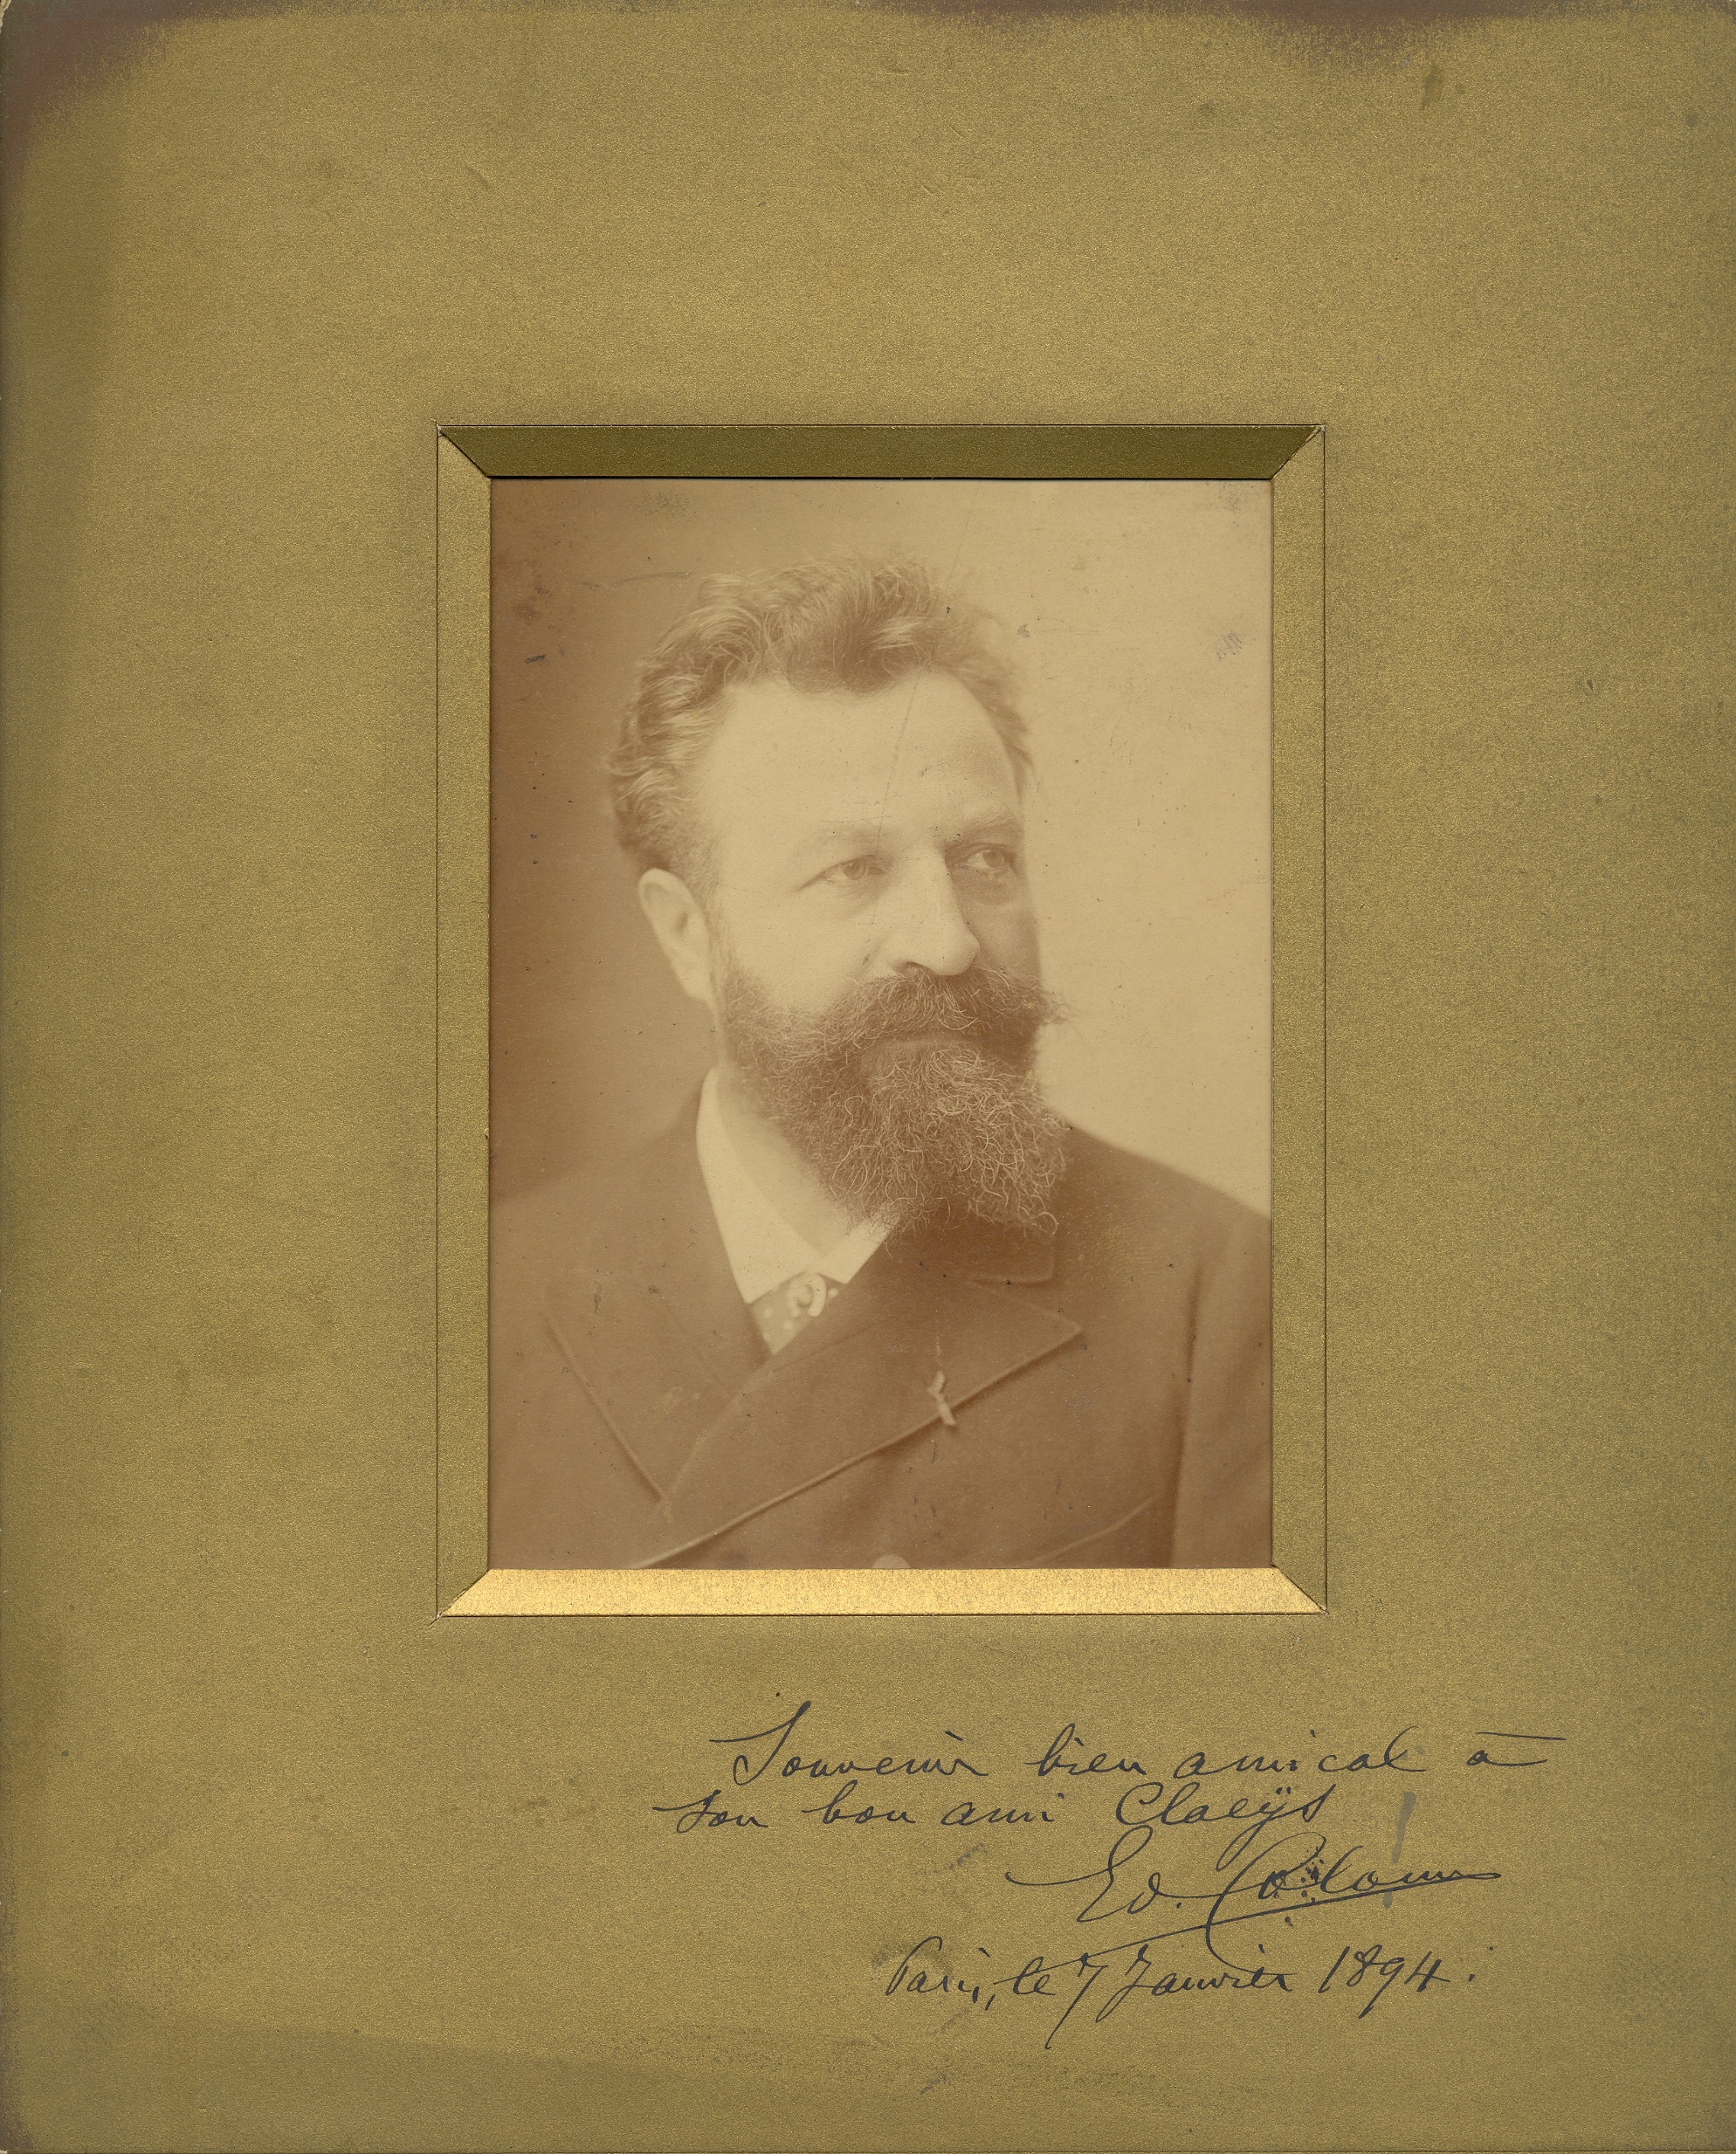 COLONNE EDOUARD: (1838-1910) French Conductor and Violinist.